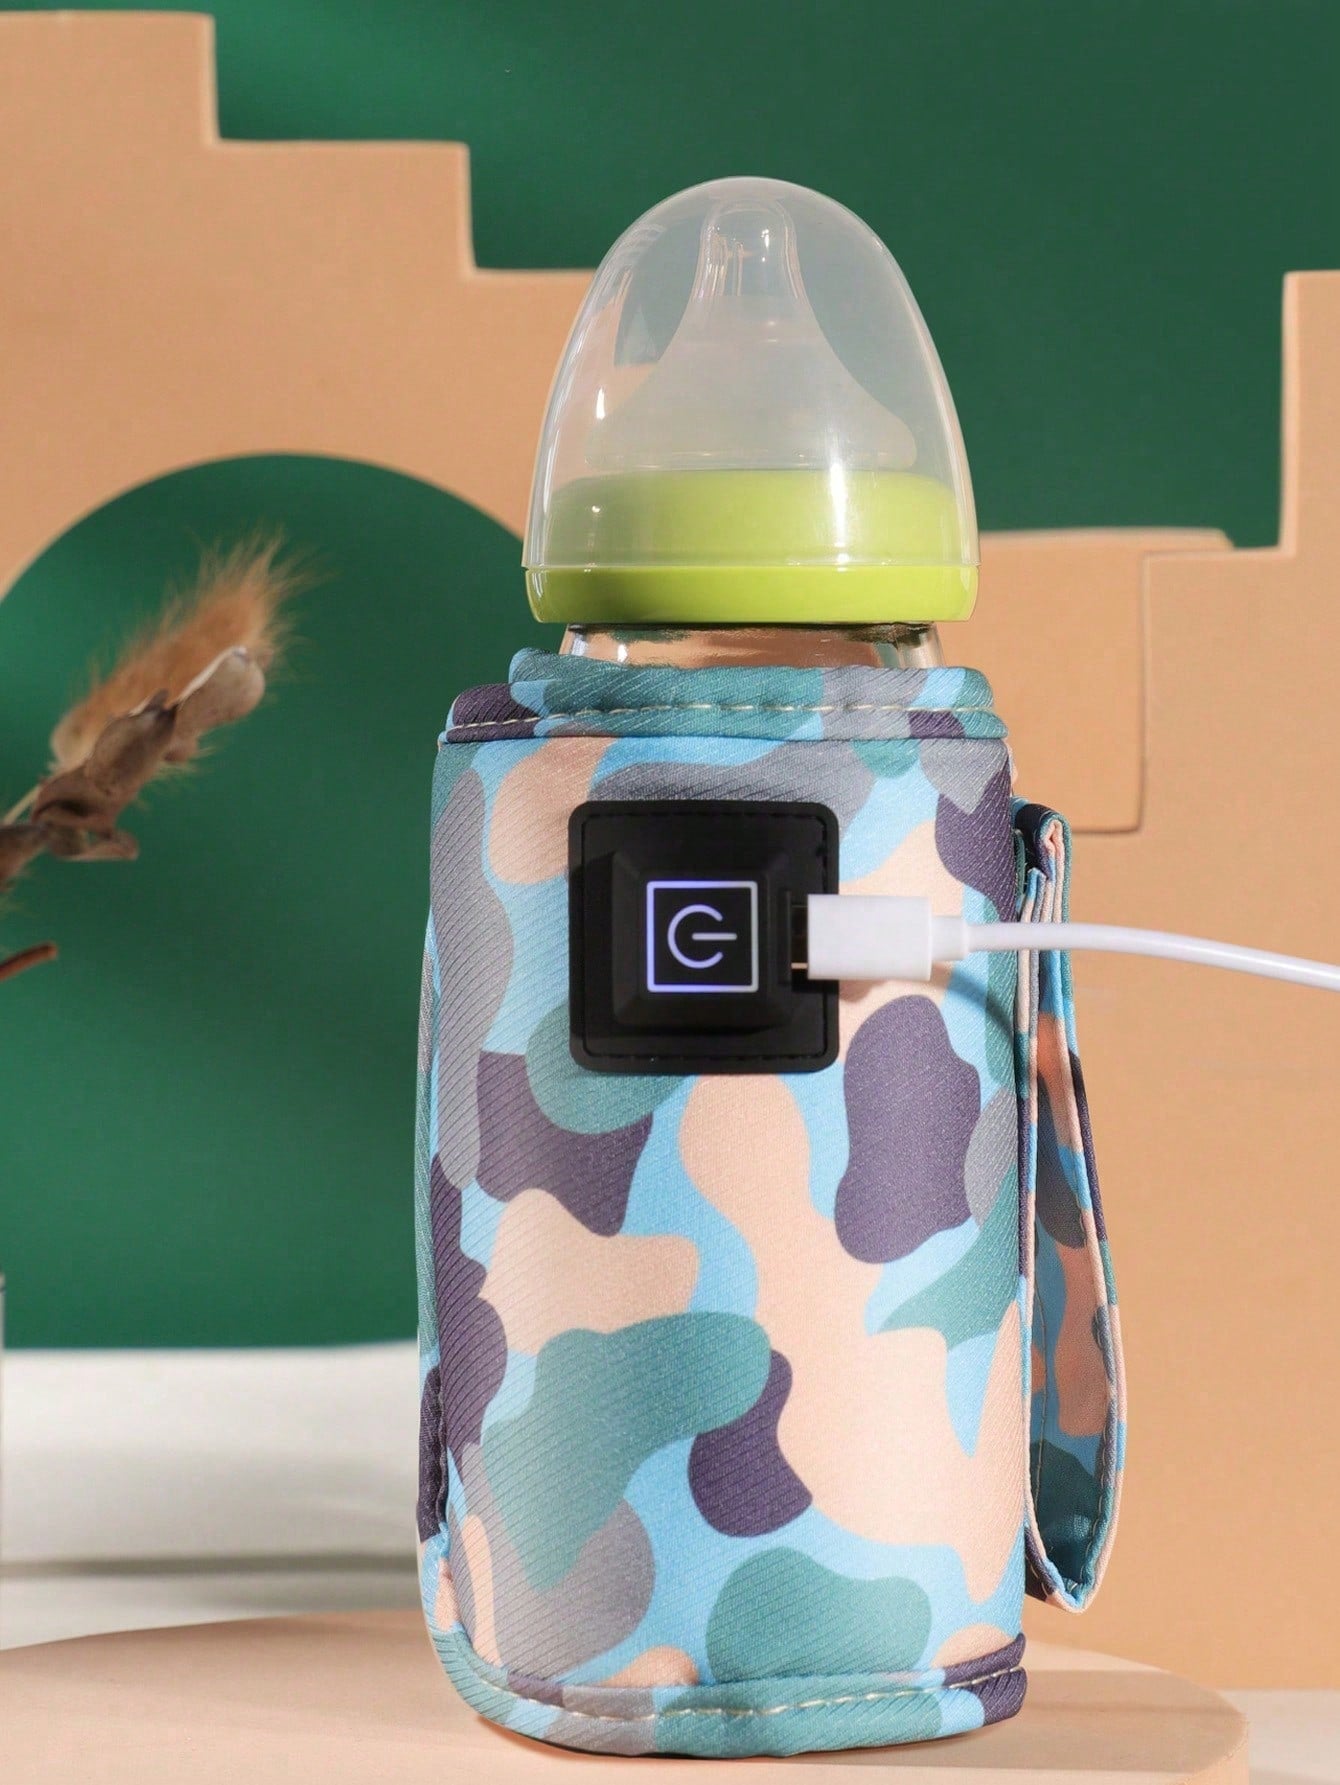 (Power By USB) Portable Bottle Warmer ,Milk Bottle Heater, Drink Warm, Milk Thermostat Bag Travel For Breastmilk In Car Heaters Christmas Gift-Camouflage Blue-1